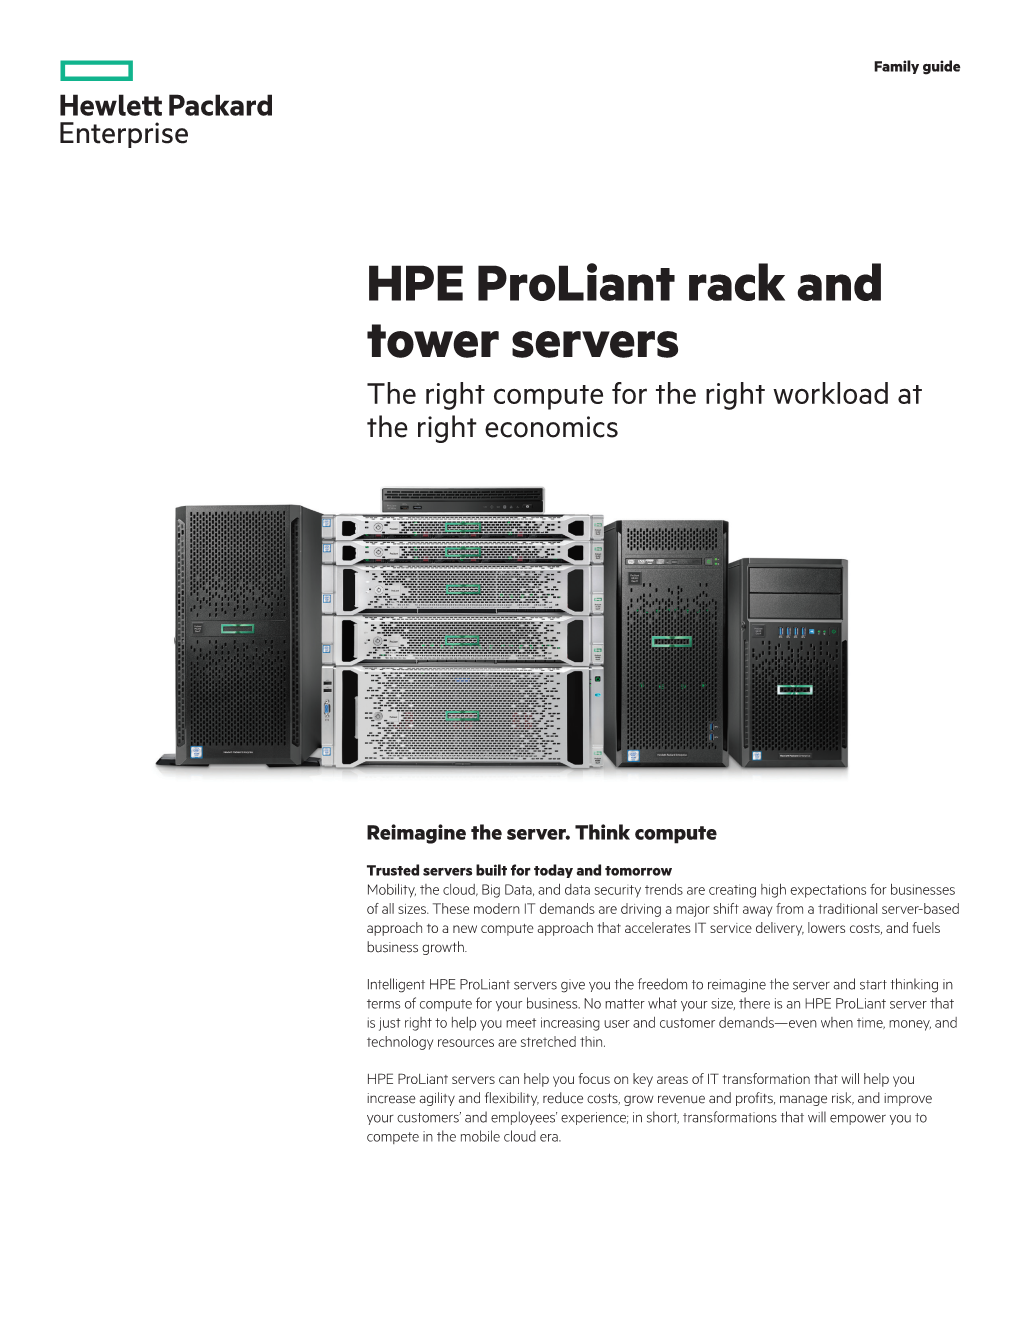 HPE Proliant Rack and Tower Servers Family Guide